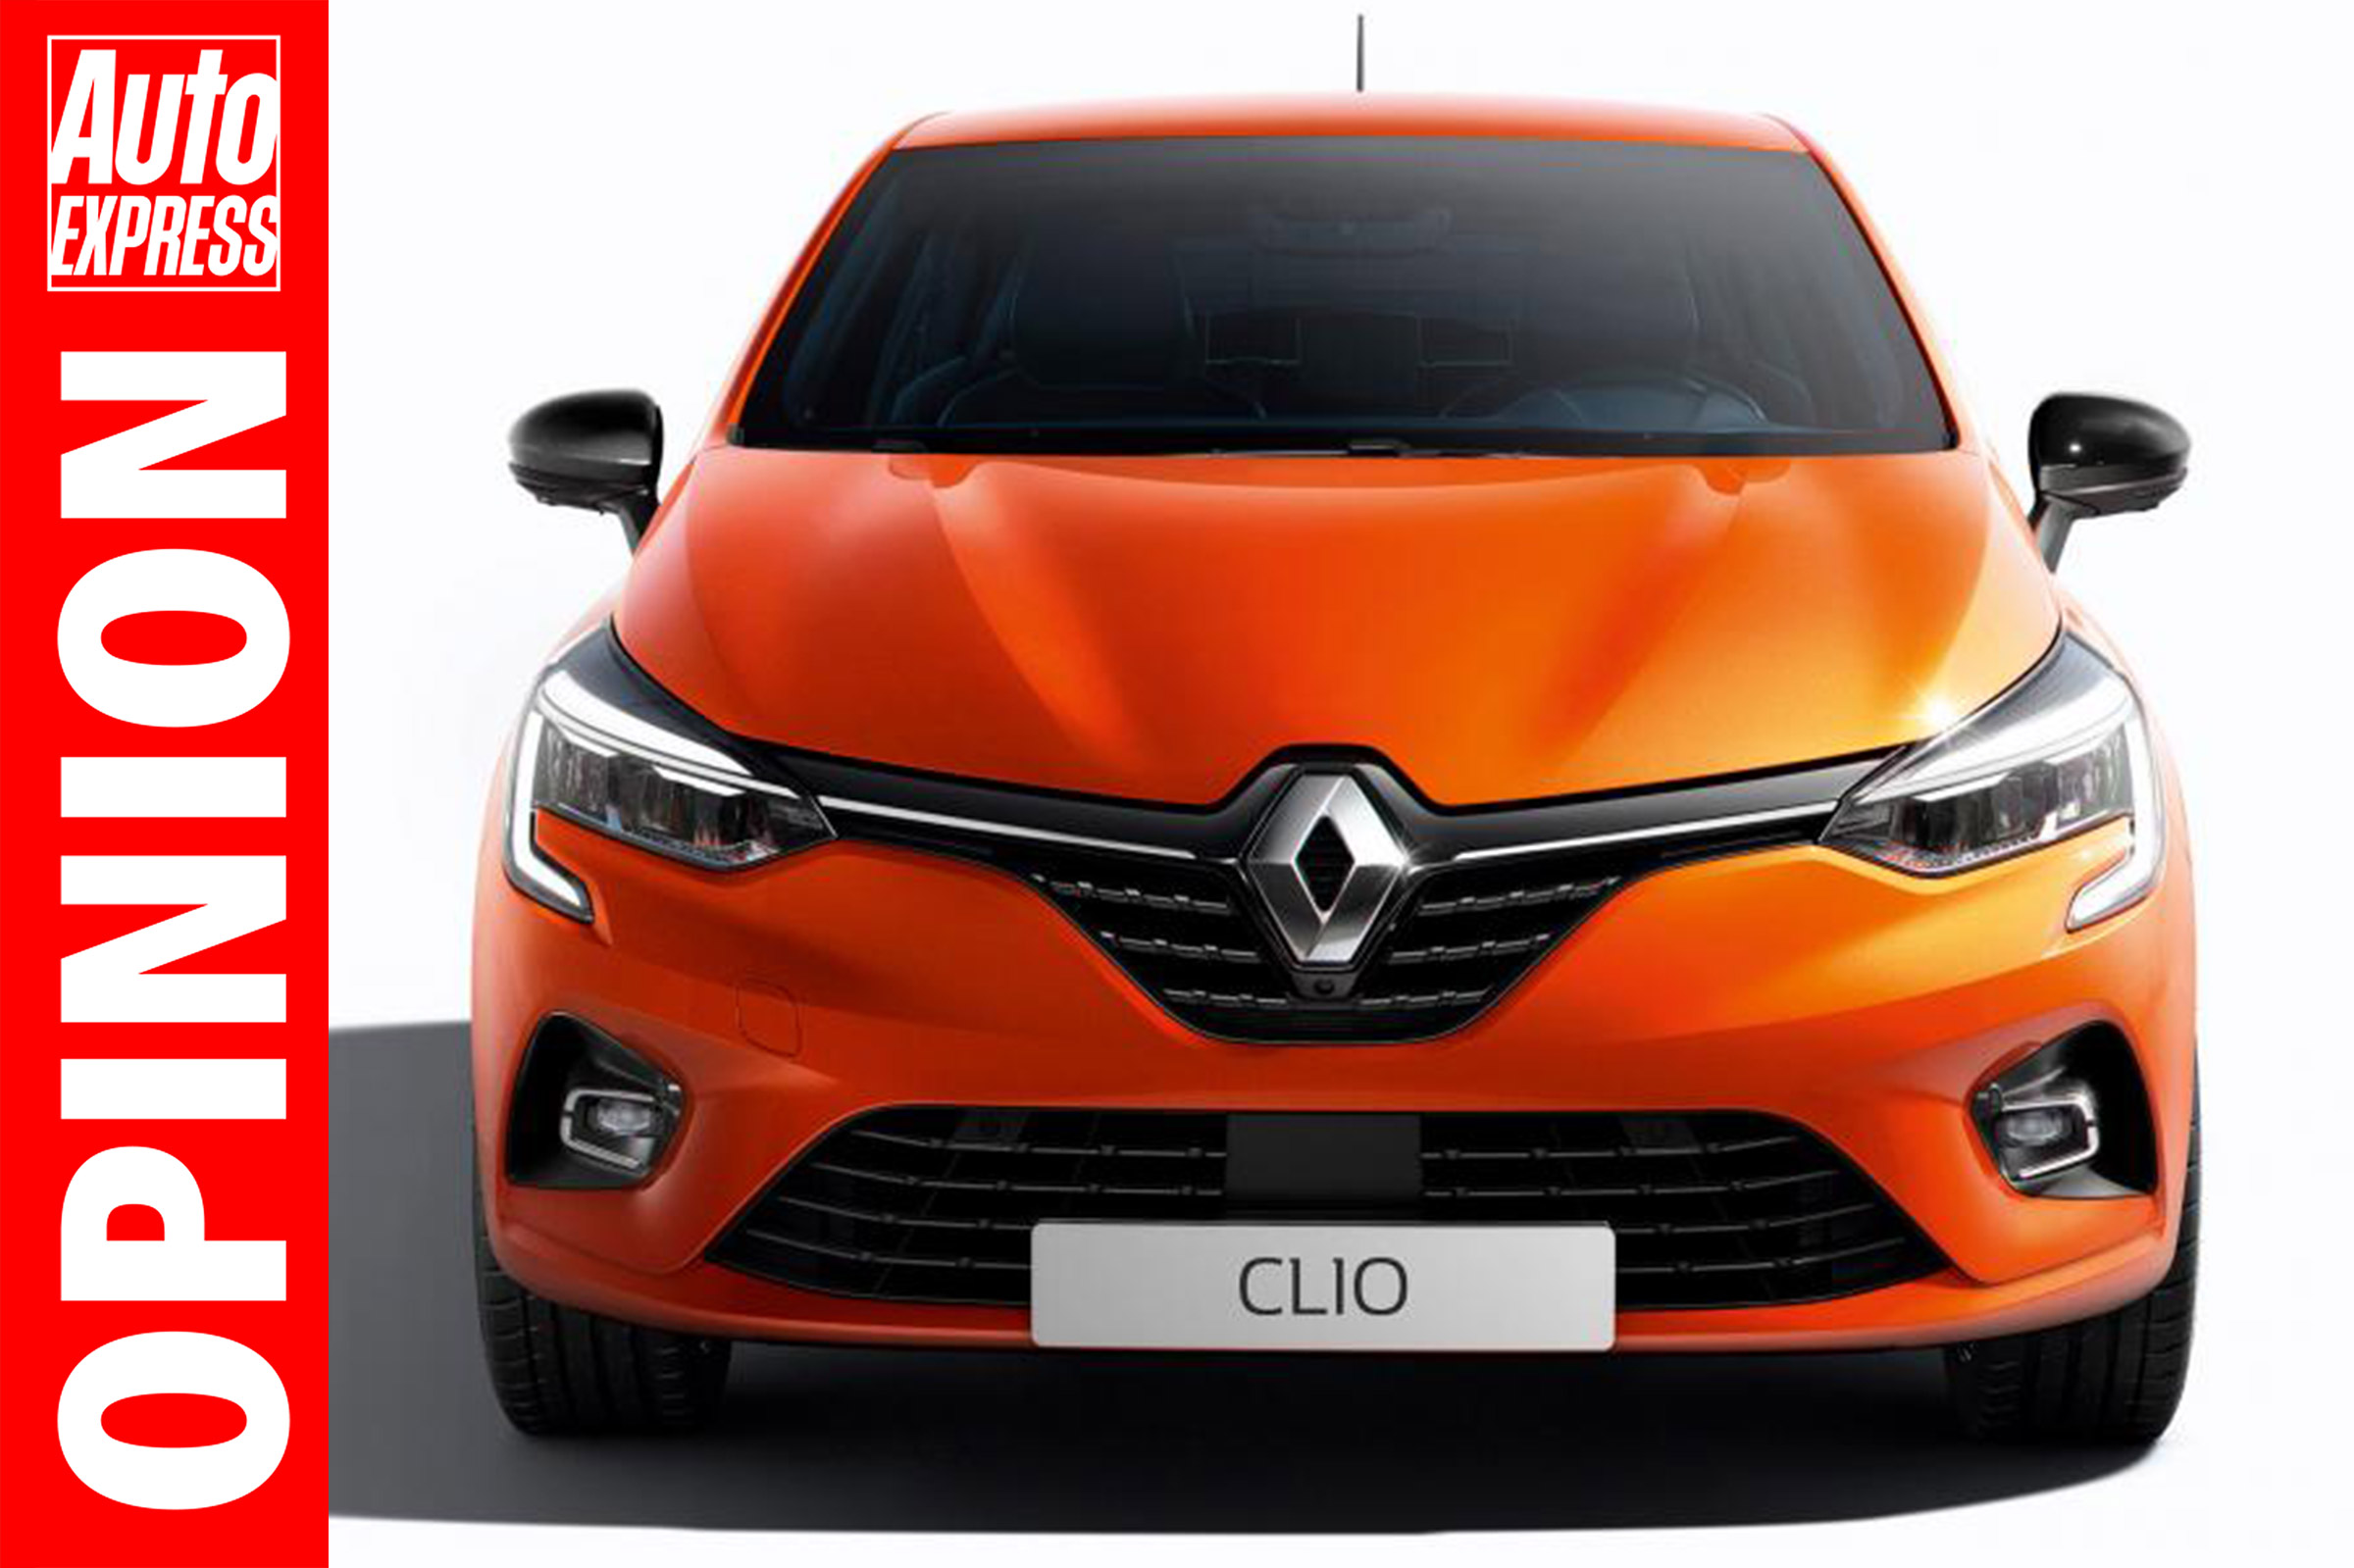 'Renault dealers must deliver on the new Clio's promise 